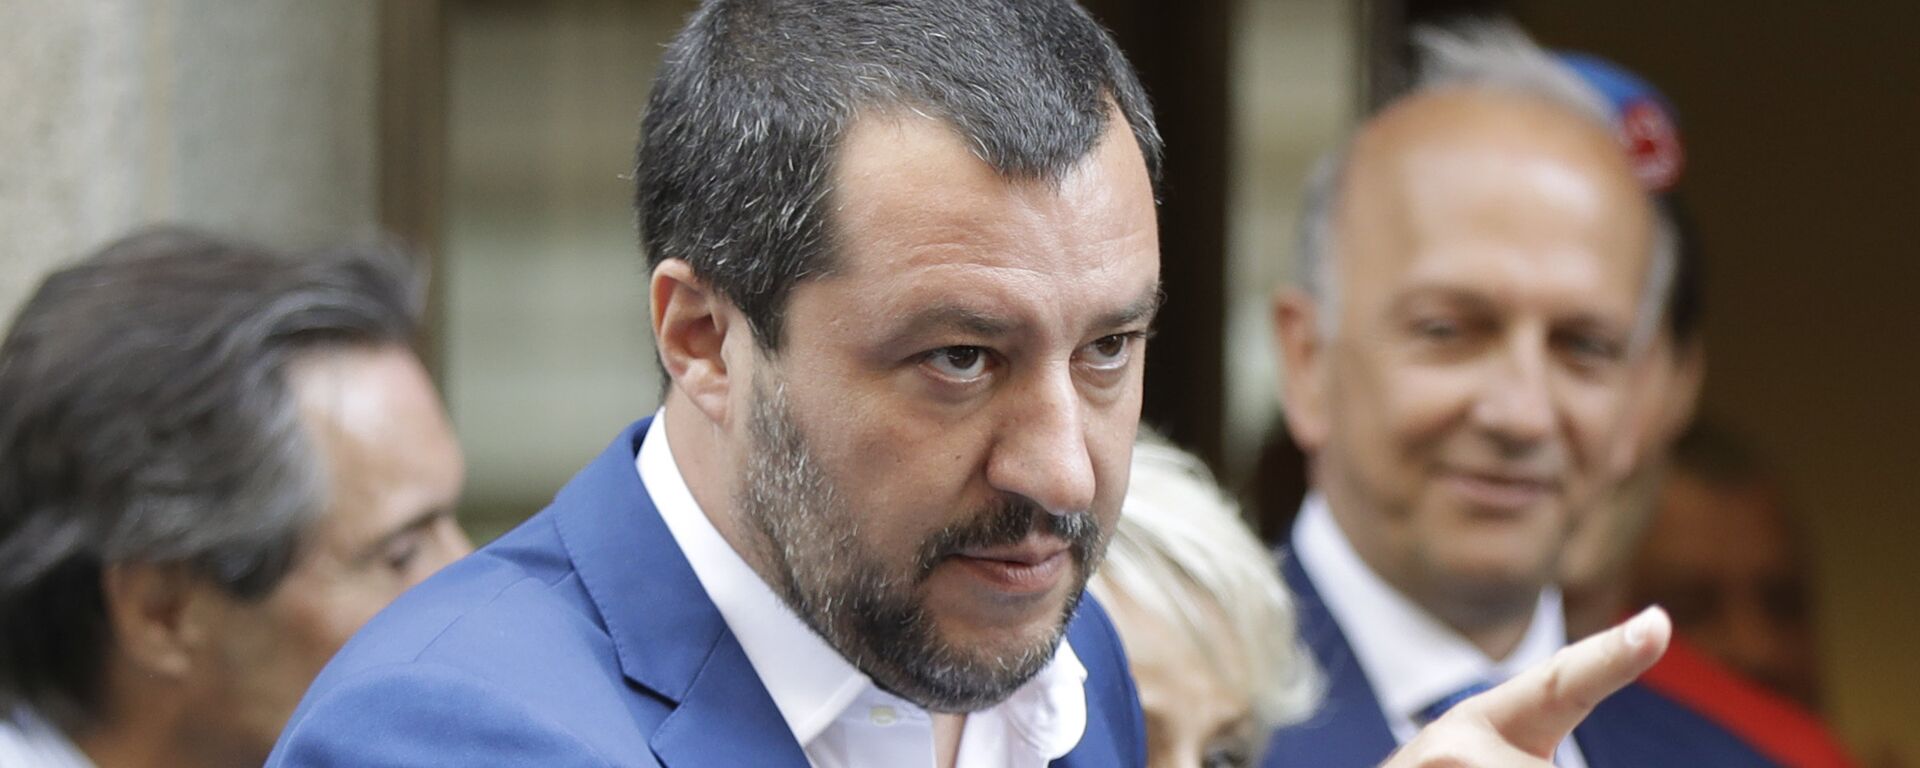 Italian Interior Minister and right-wing League leader Matteo Salvini, gestures as he arrives for a lunch at an hotel in Milan, Italy, Monday, July 2, 2018. The leader of the right-wing party in Italy's populist government told tens of thousands of supporters Sunday he wants to turn next year's European Parliament election into a referendum on immigration and job security - Sputnik International, 1920, 15.05.2022